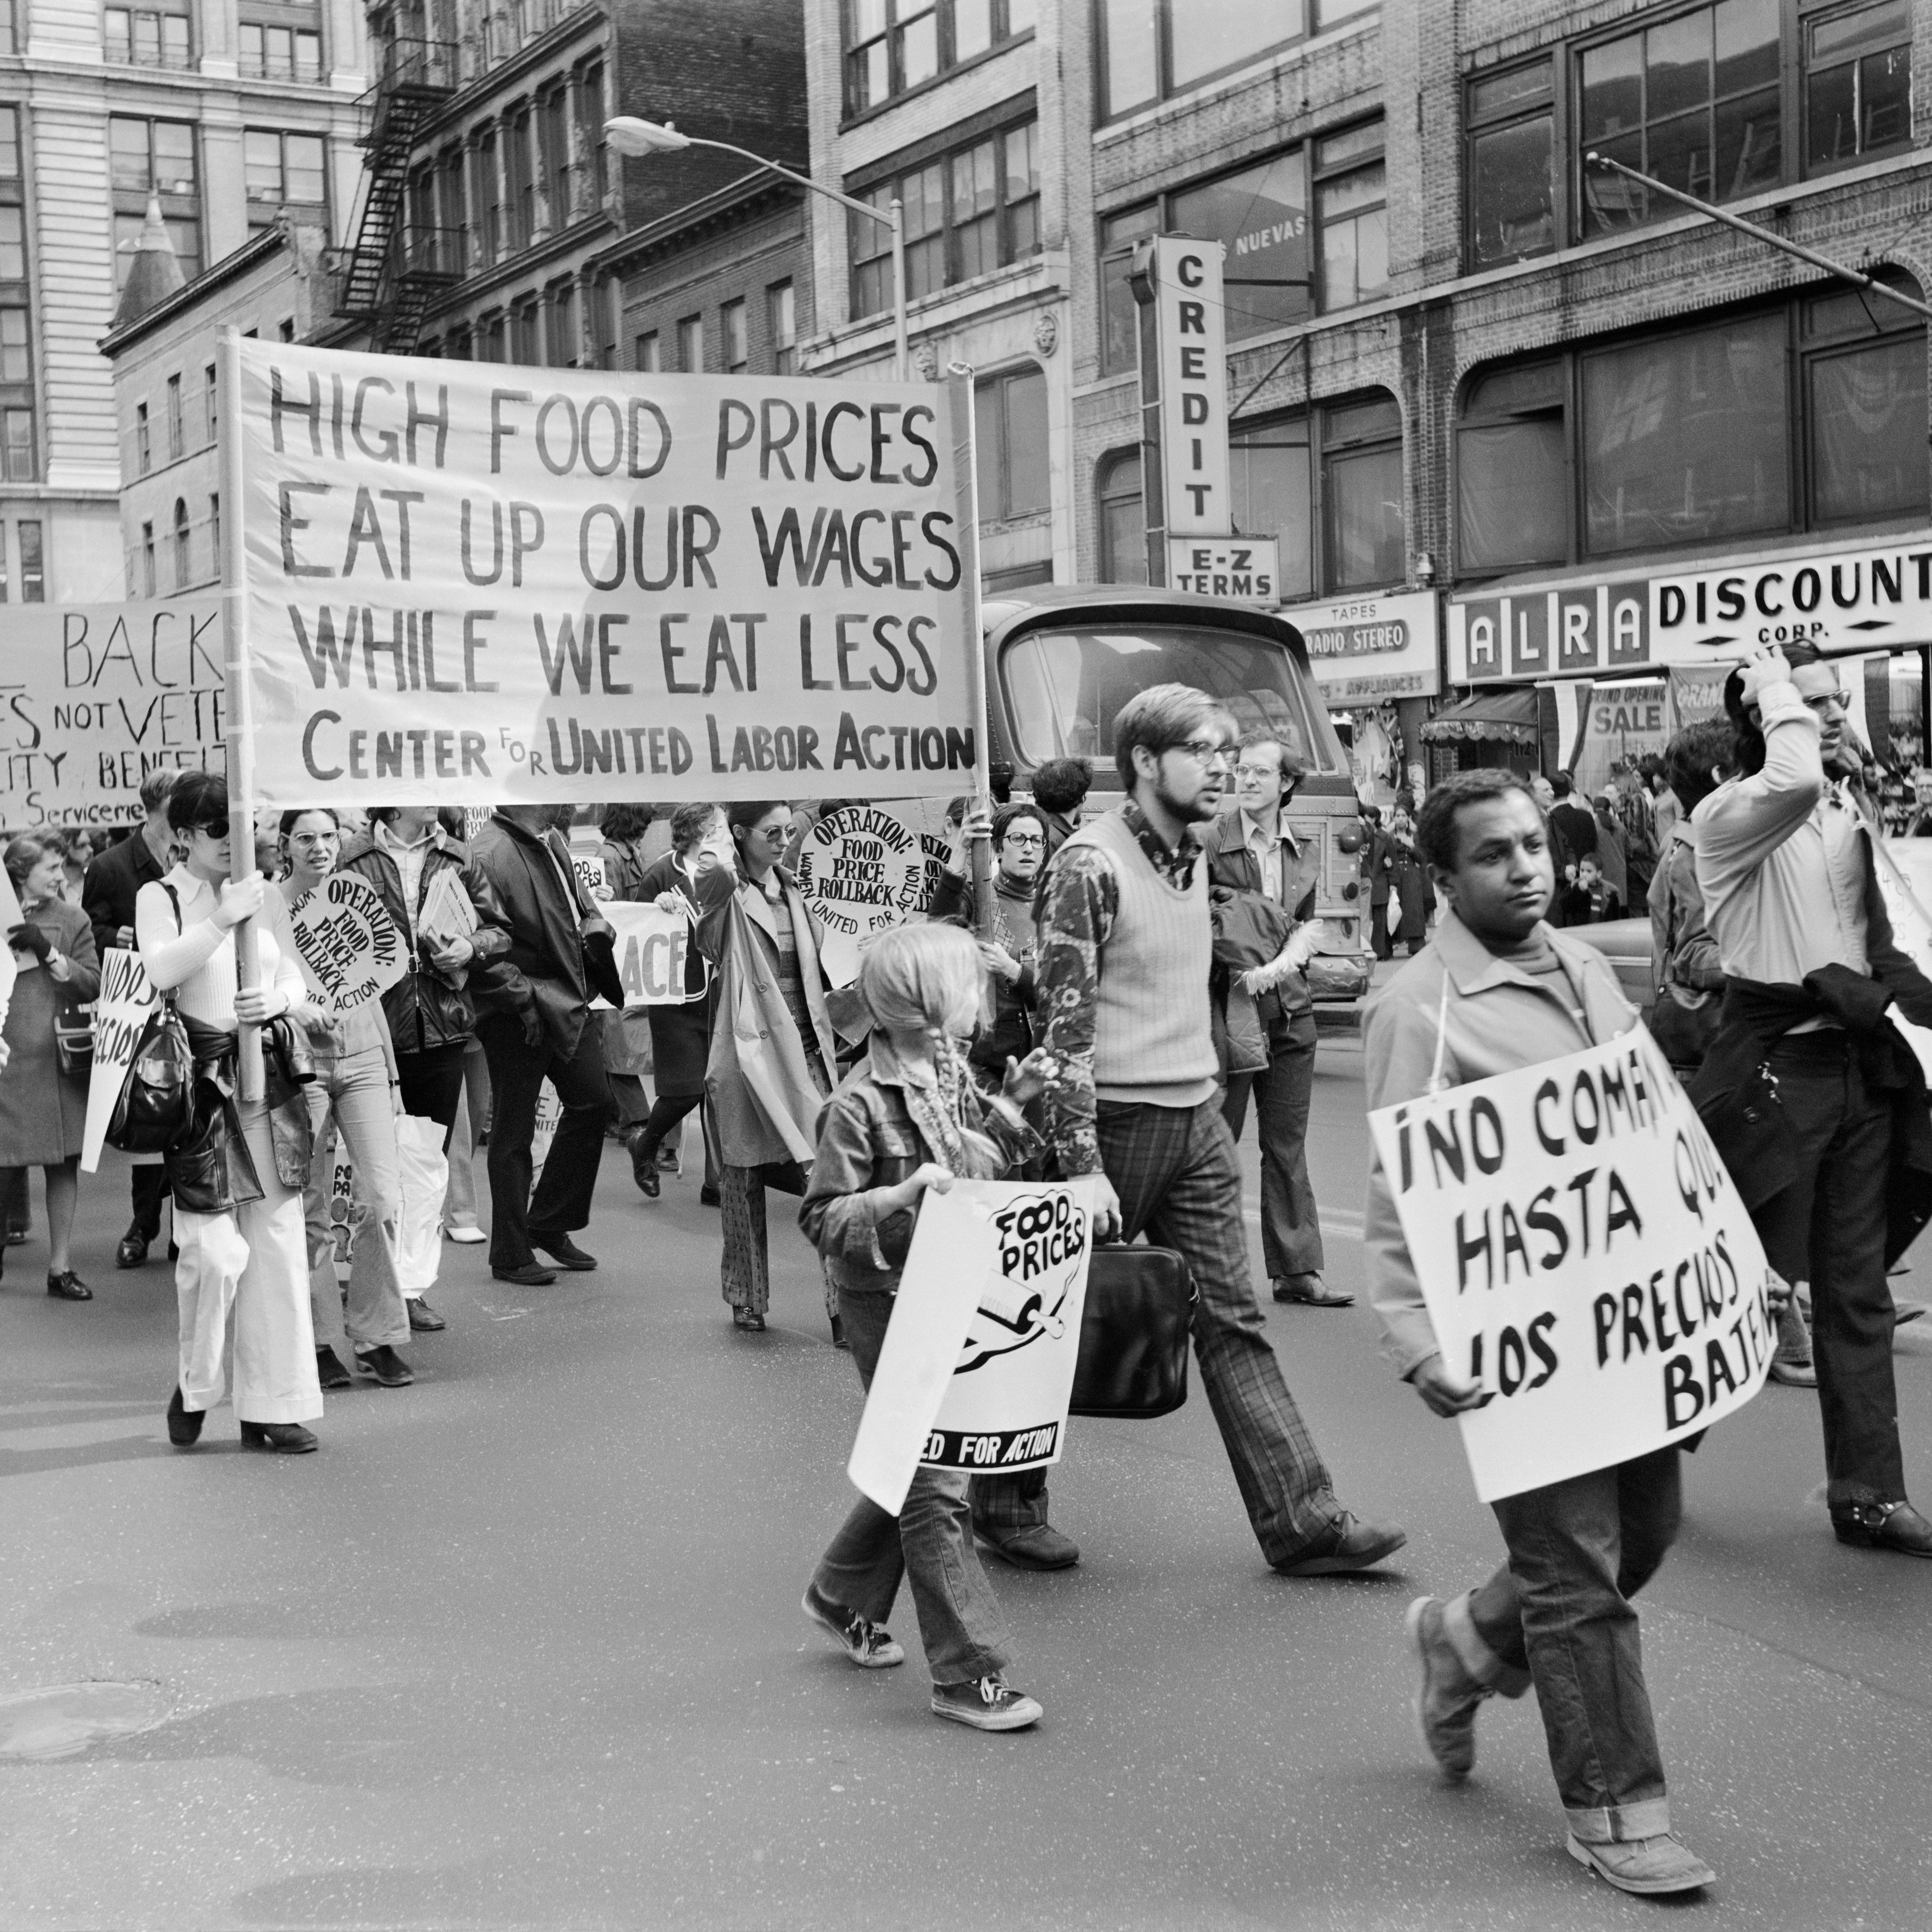 A 1970s protest.